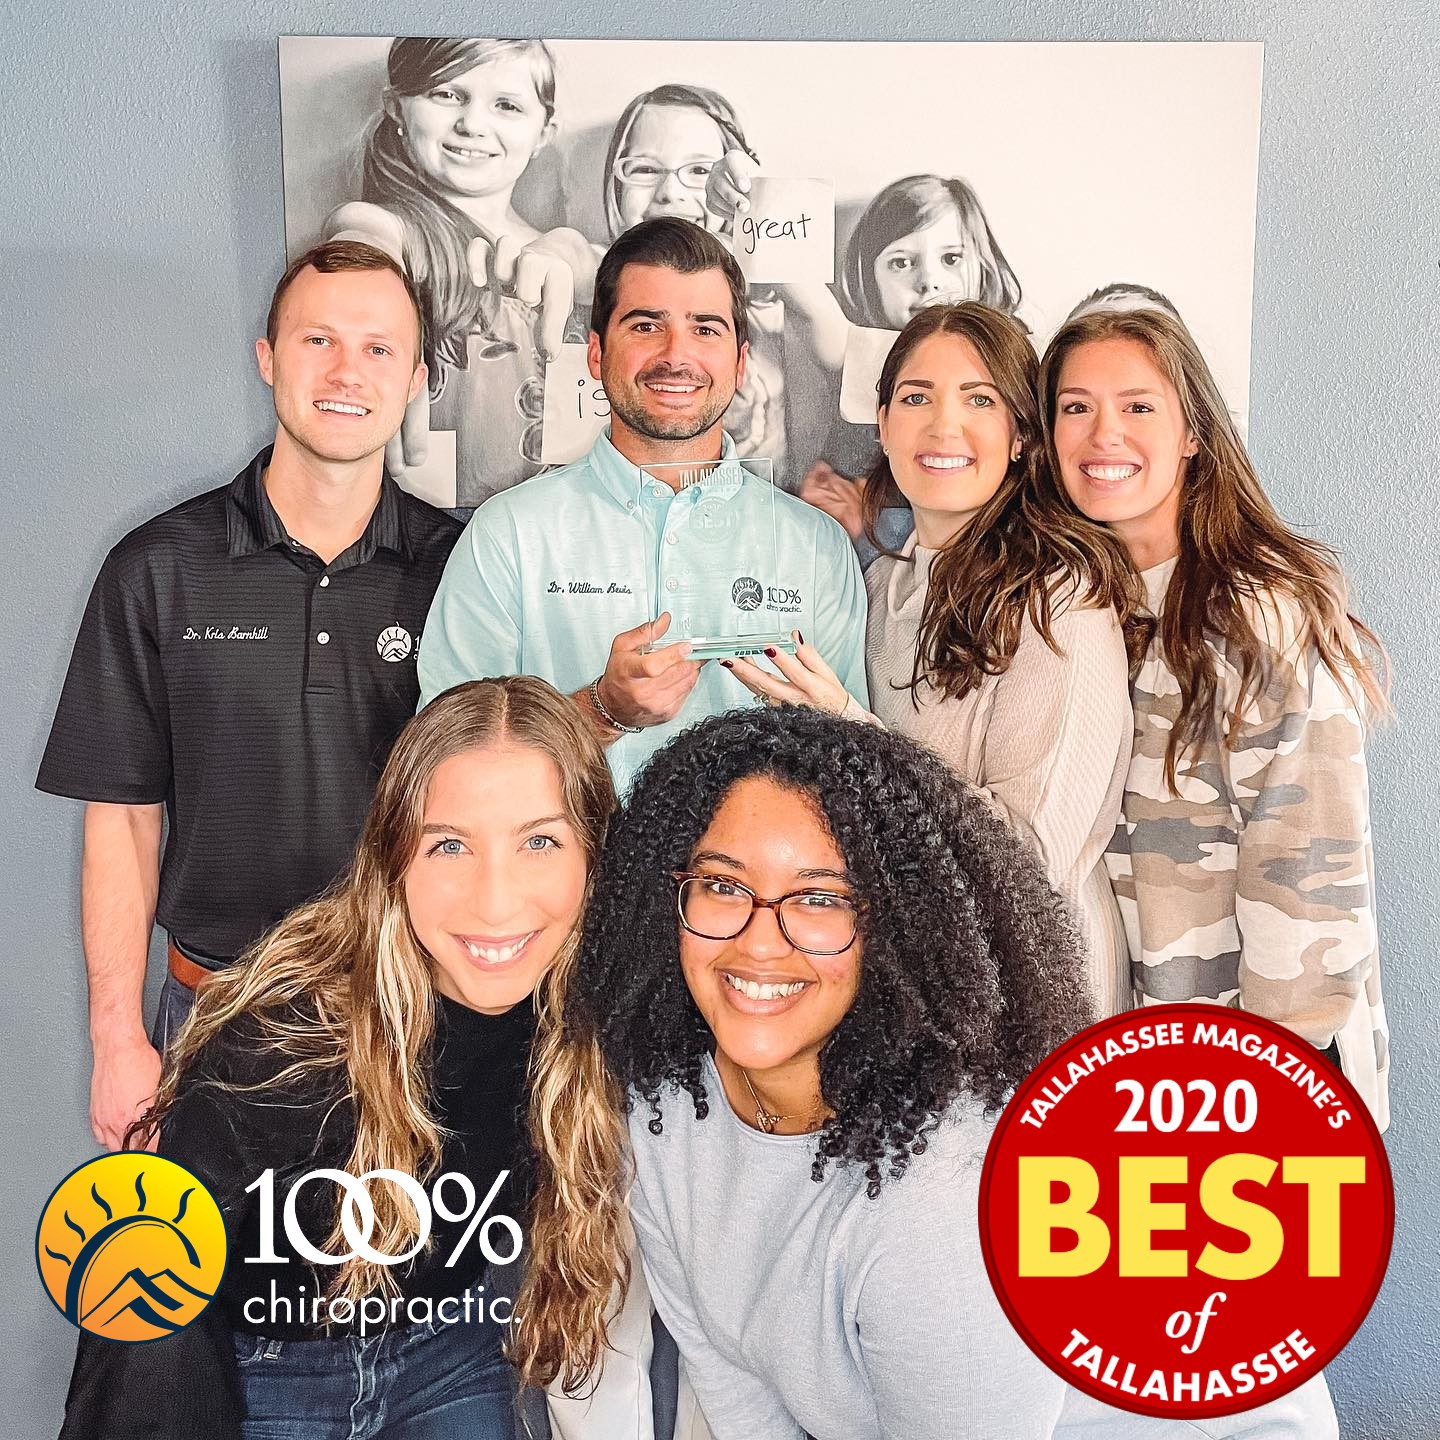 Thank you Tallahassee! We’re so honored to be voted Best Chiropractor yet again! We’re so passionate about this community and the health of its people, and look forward to delivering the BEST care for you and your families for years to come!